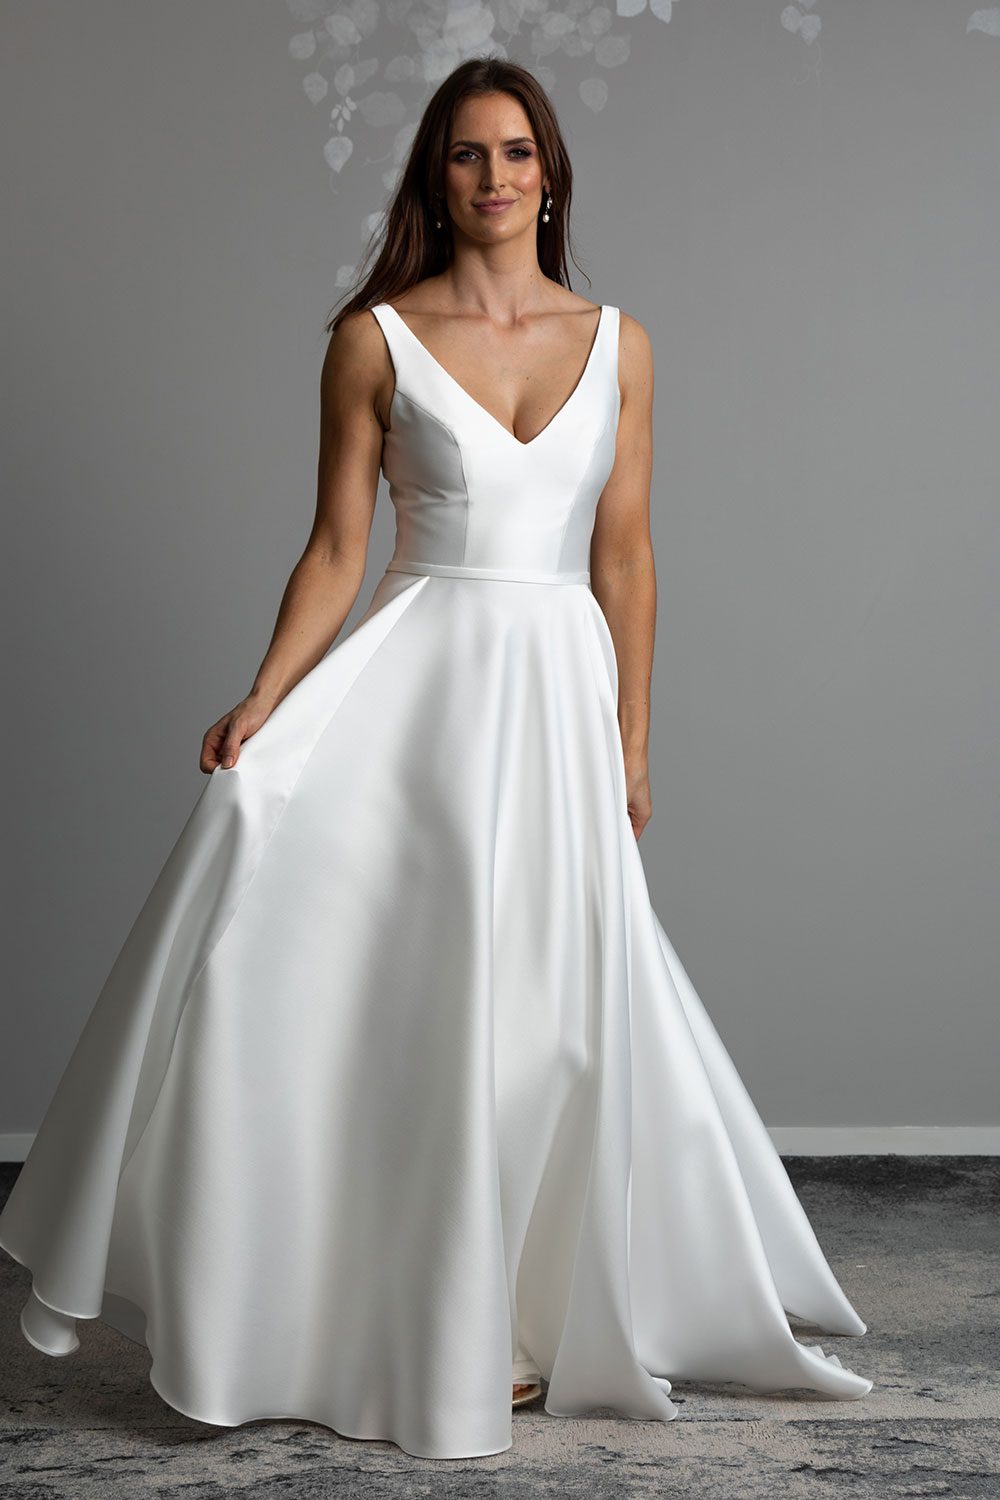 Madison Wedding gown from Vinka Design - This gown is both classic and contemporary, made beautifully with luxurious Mikado satin. The bodice is structured with a deep V-neckline and a squared, low back. Model showing the fullness of the skirt with irregular folds and fun and versatile side pockets